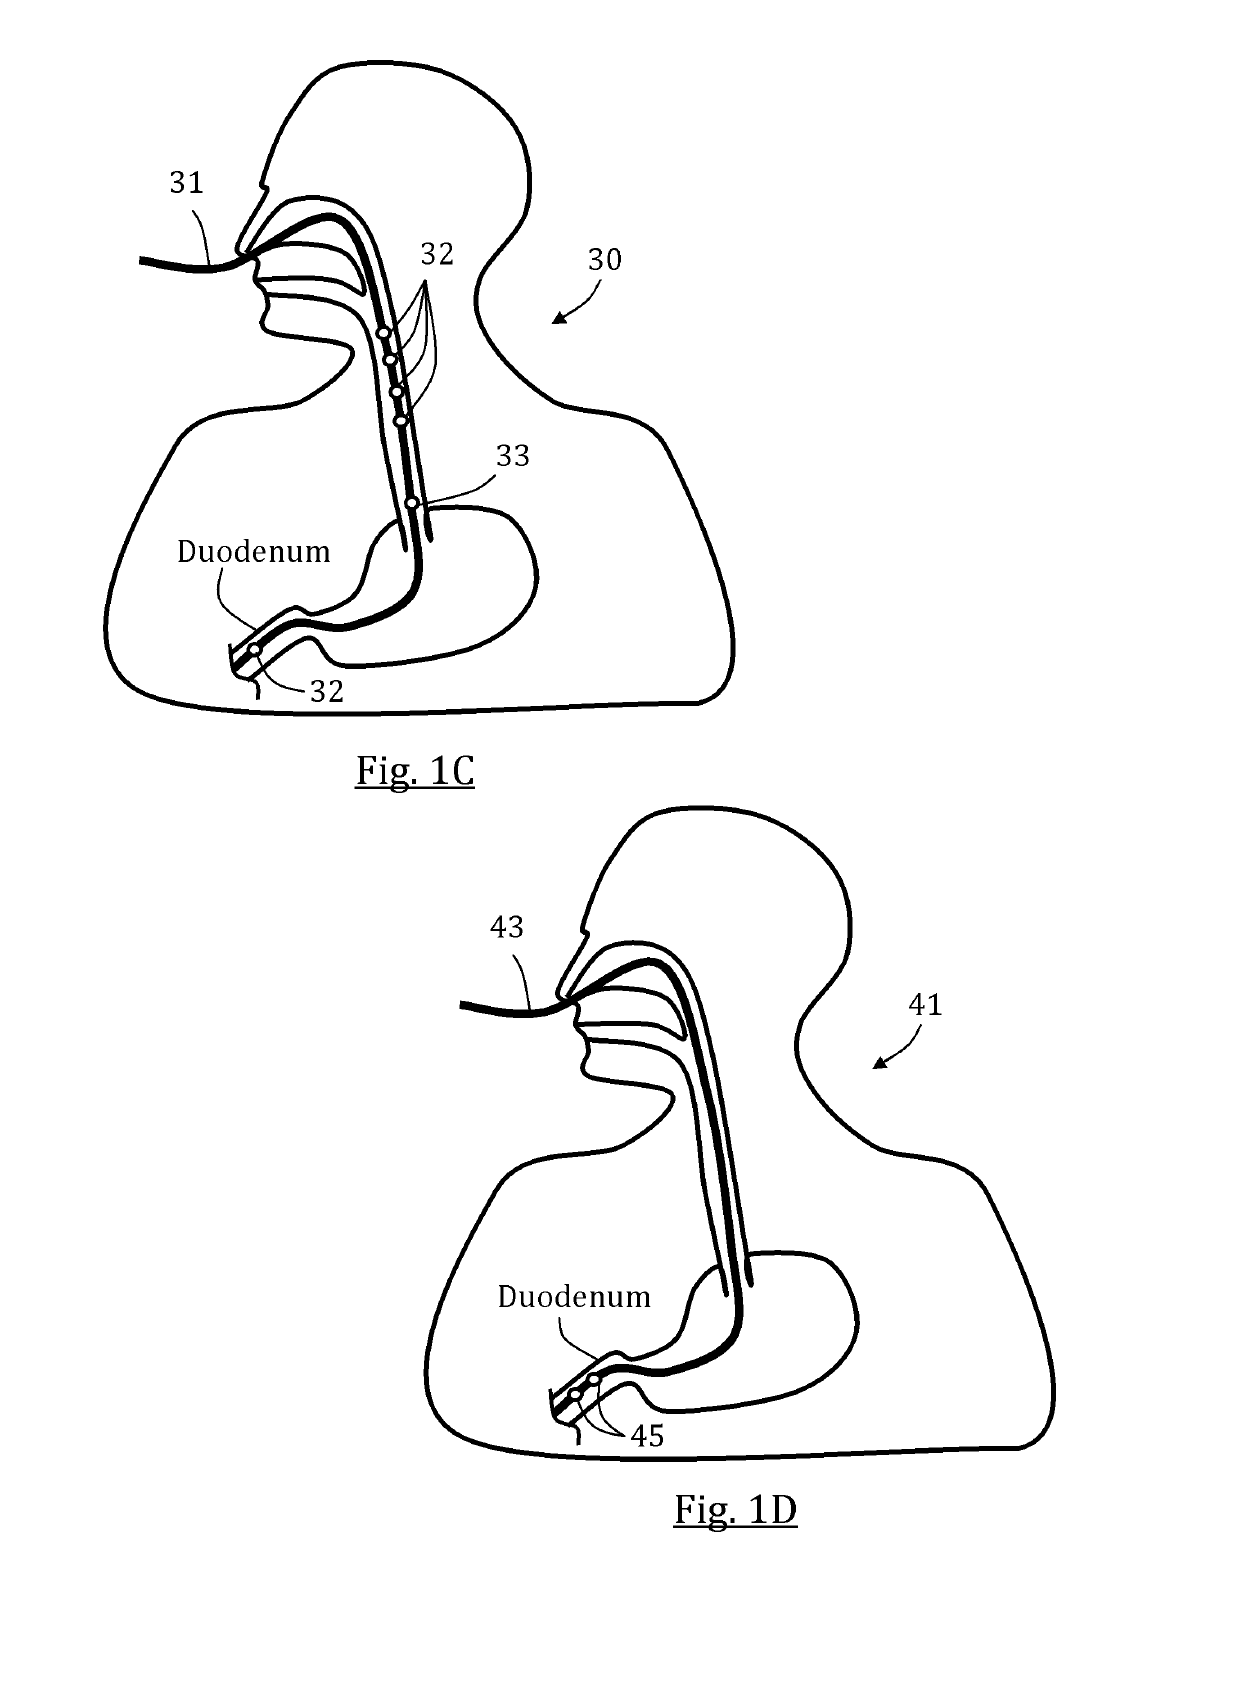 GI tract stimulation devices and methods